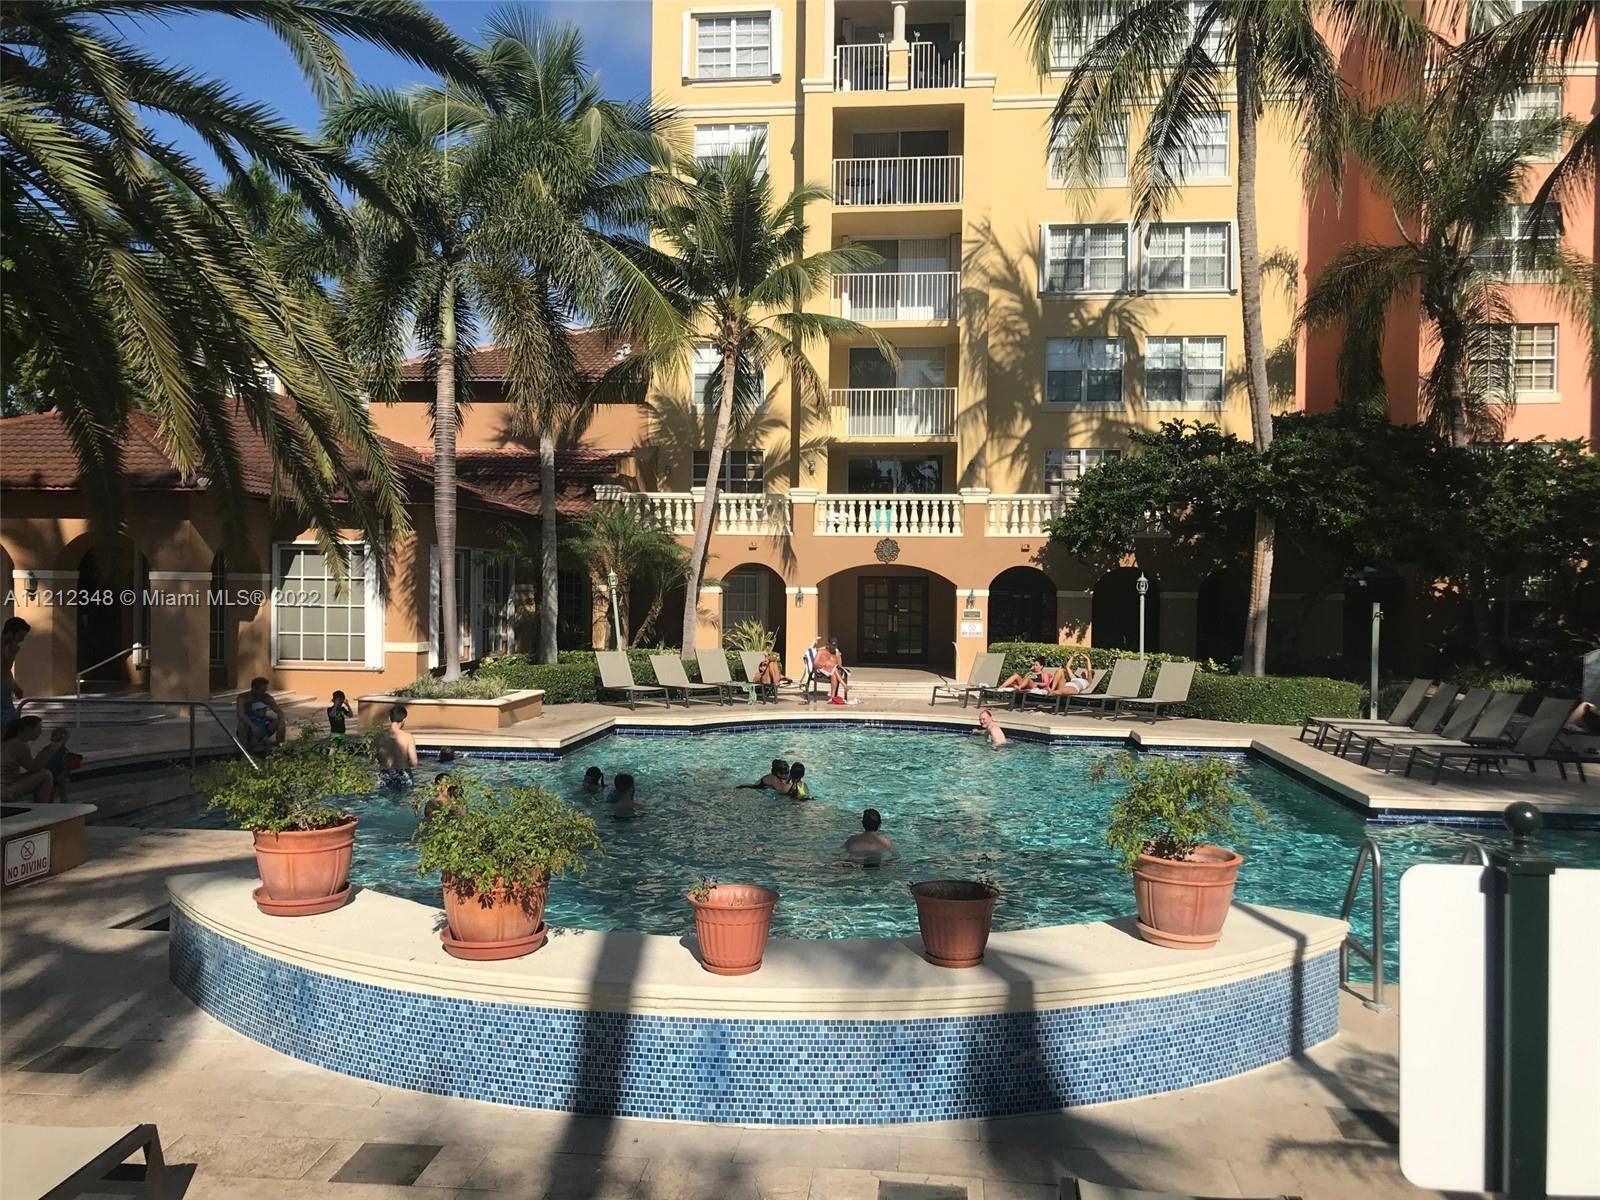 This beautiful 2bed 2bath fully furnished apartment available for short term rental is located at the prestigious The Yacht Club at Aventura.